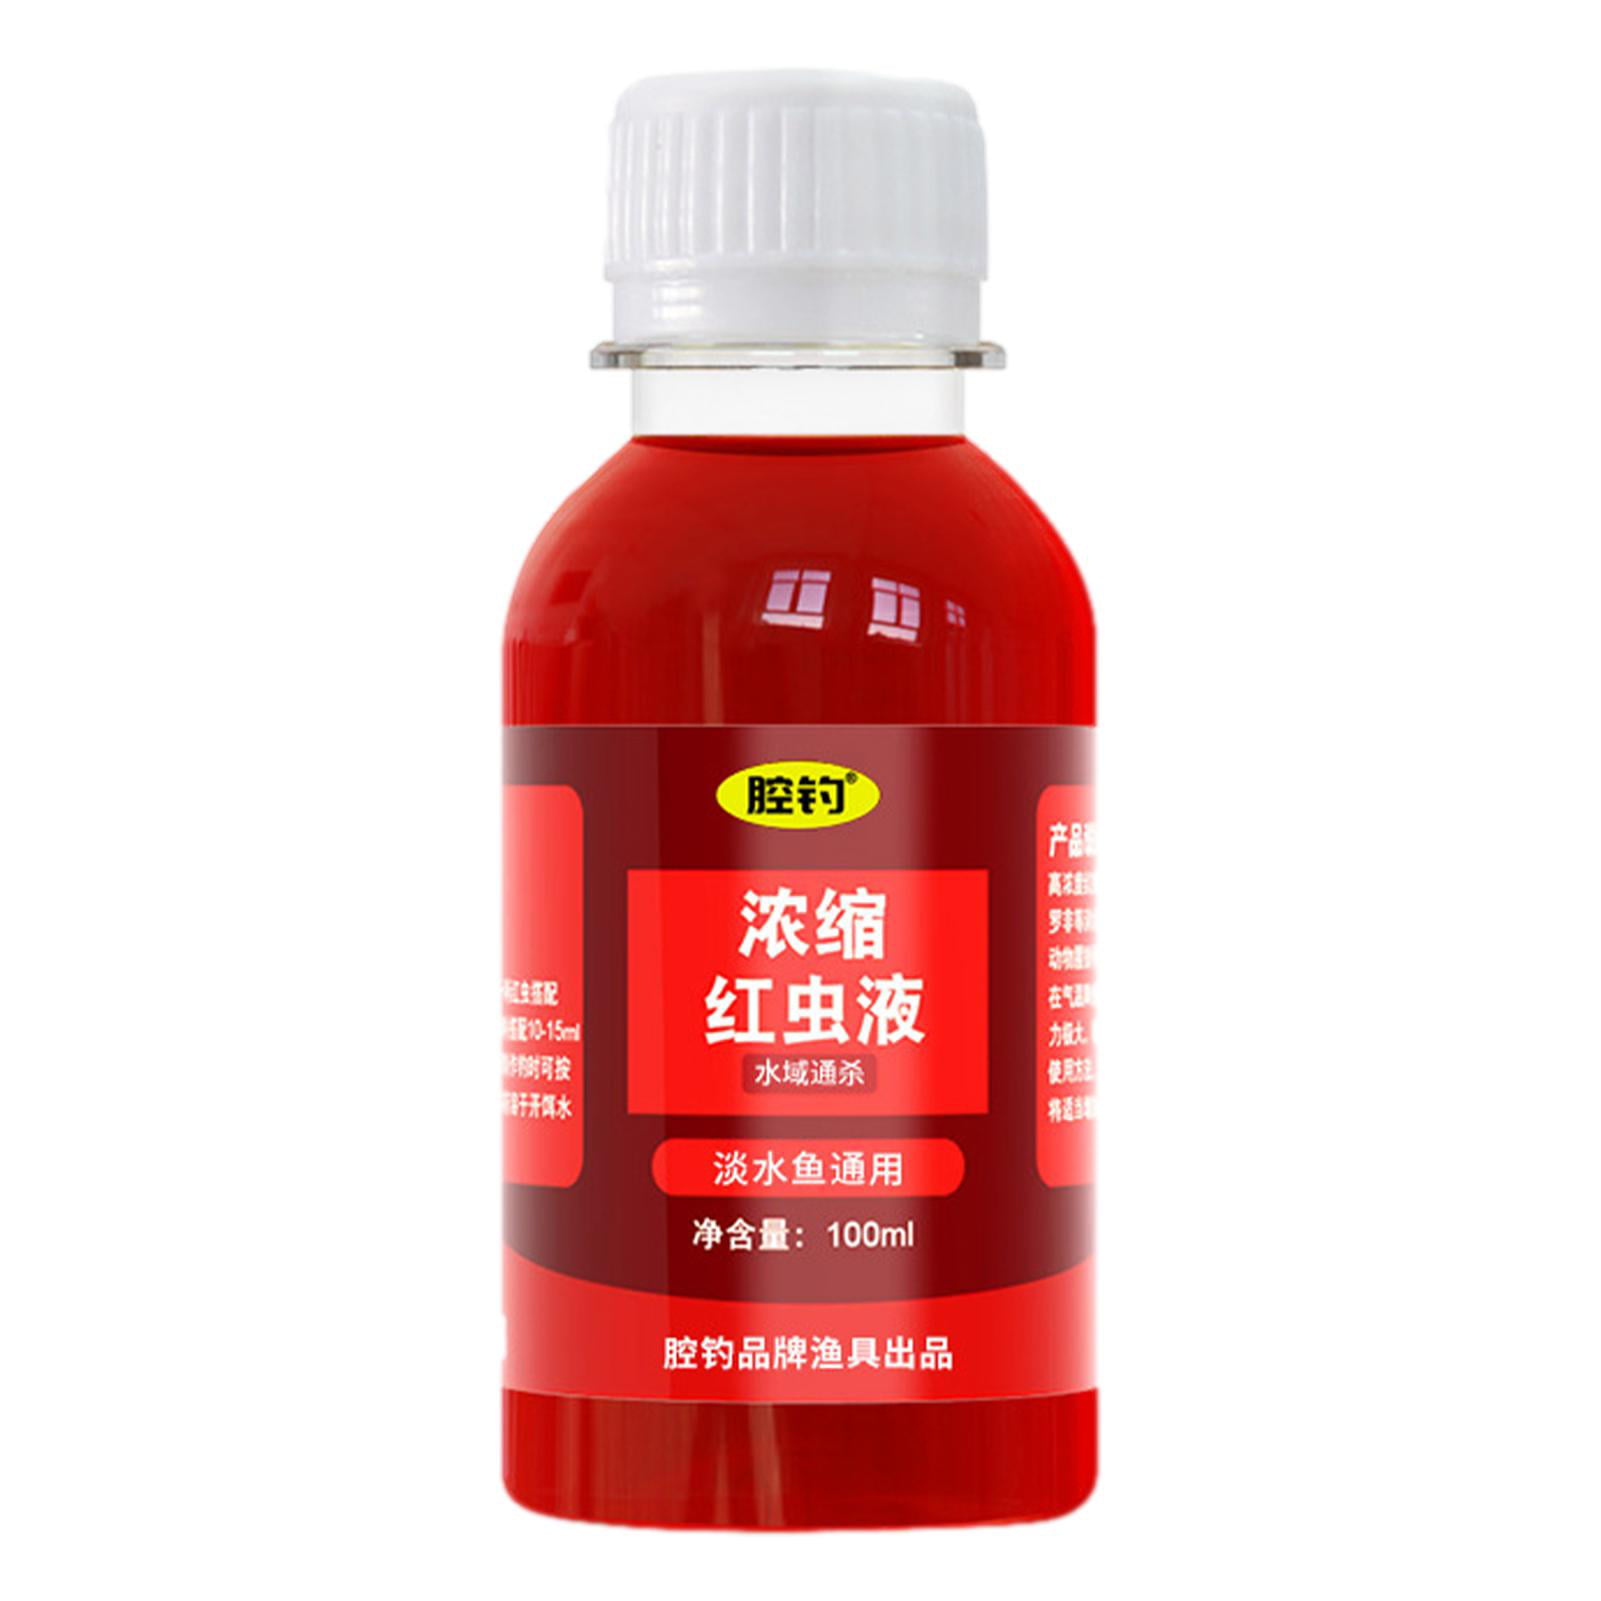 100ml Strong Fish Attractant Concentrated Red Worm Liquid Fish Bait  Additive